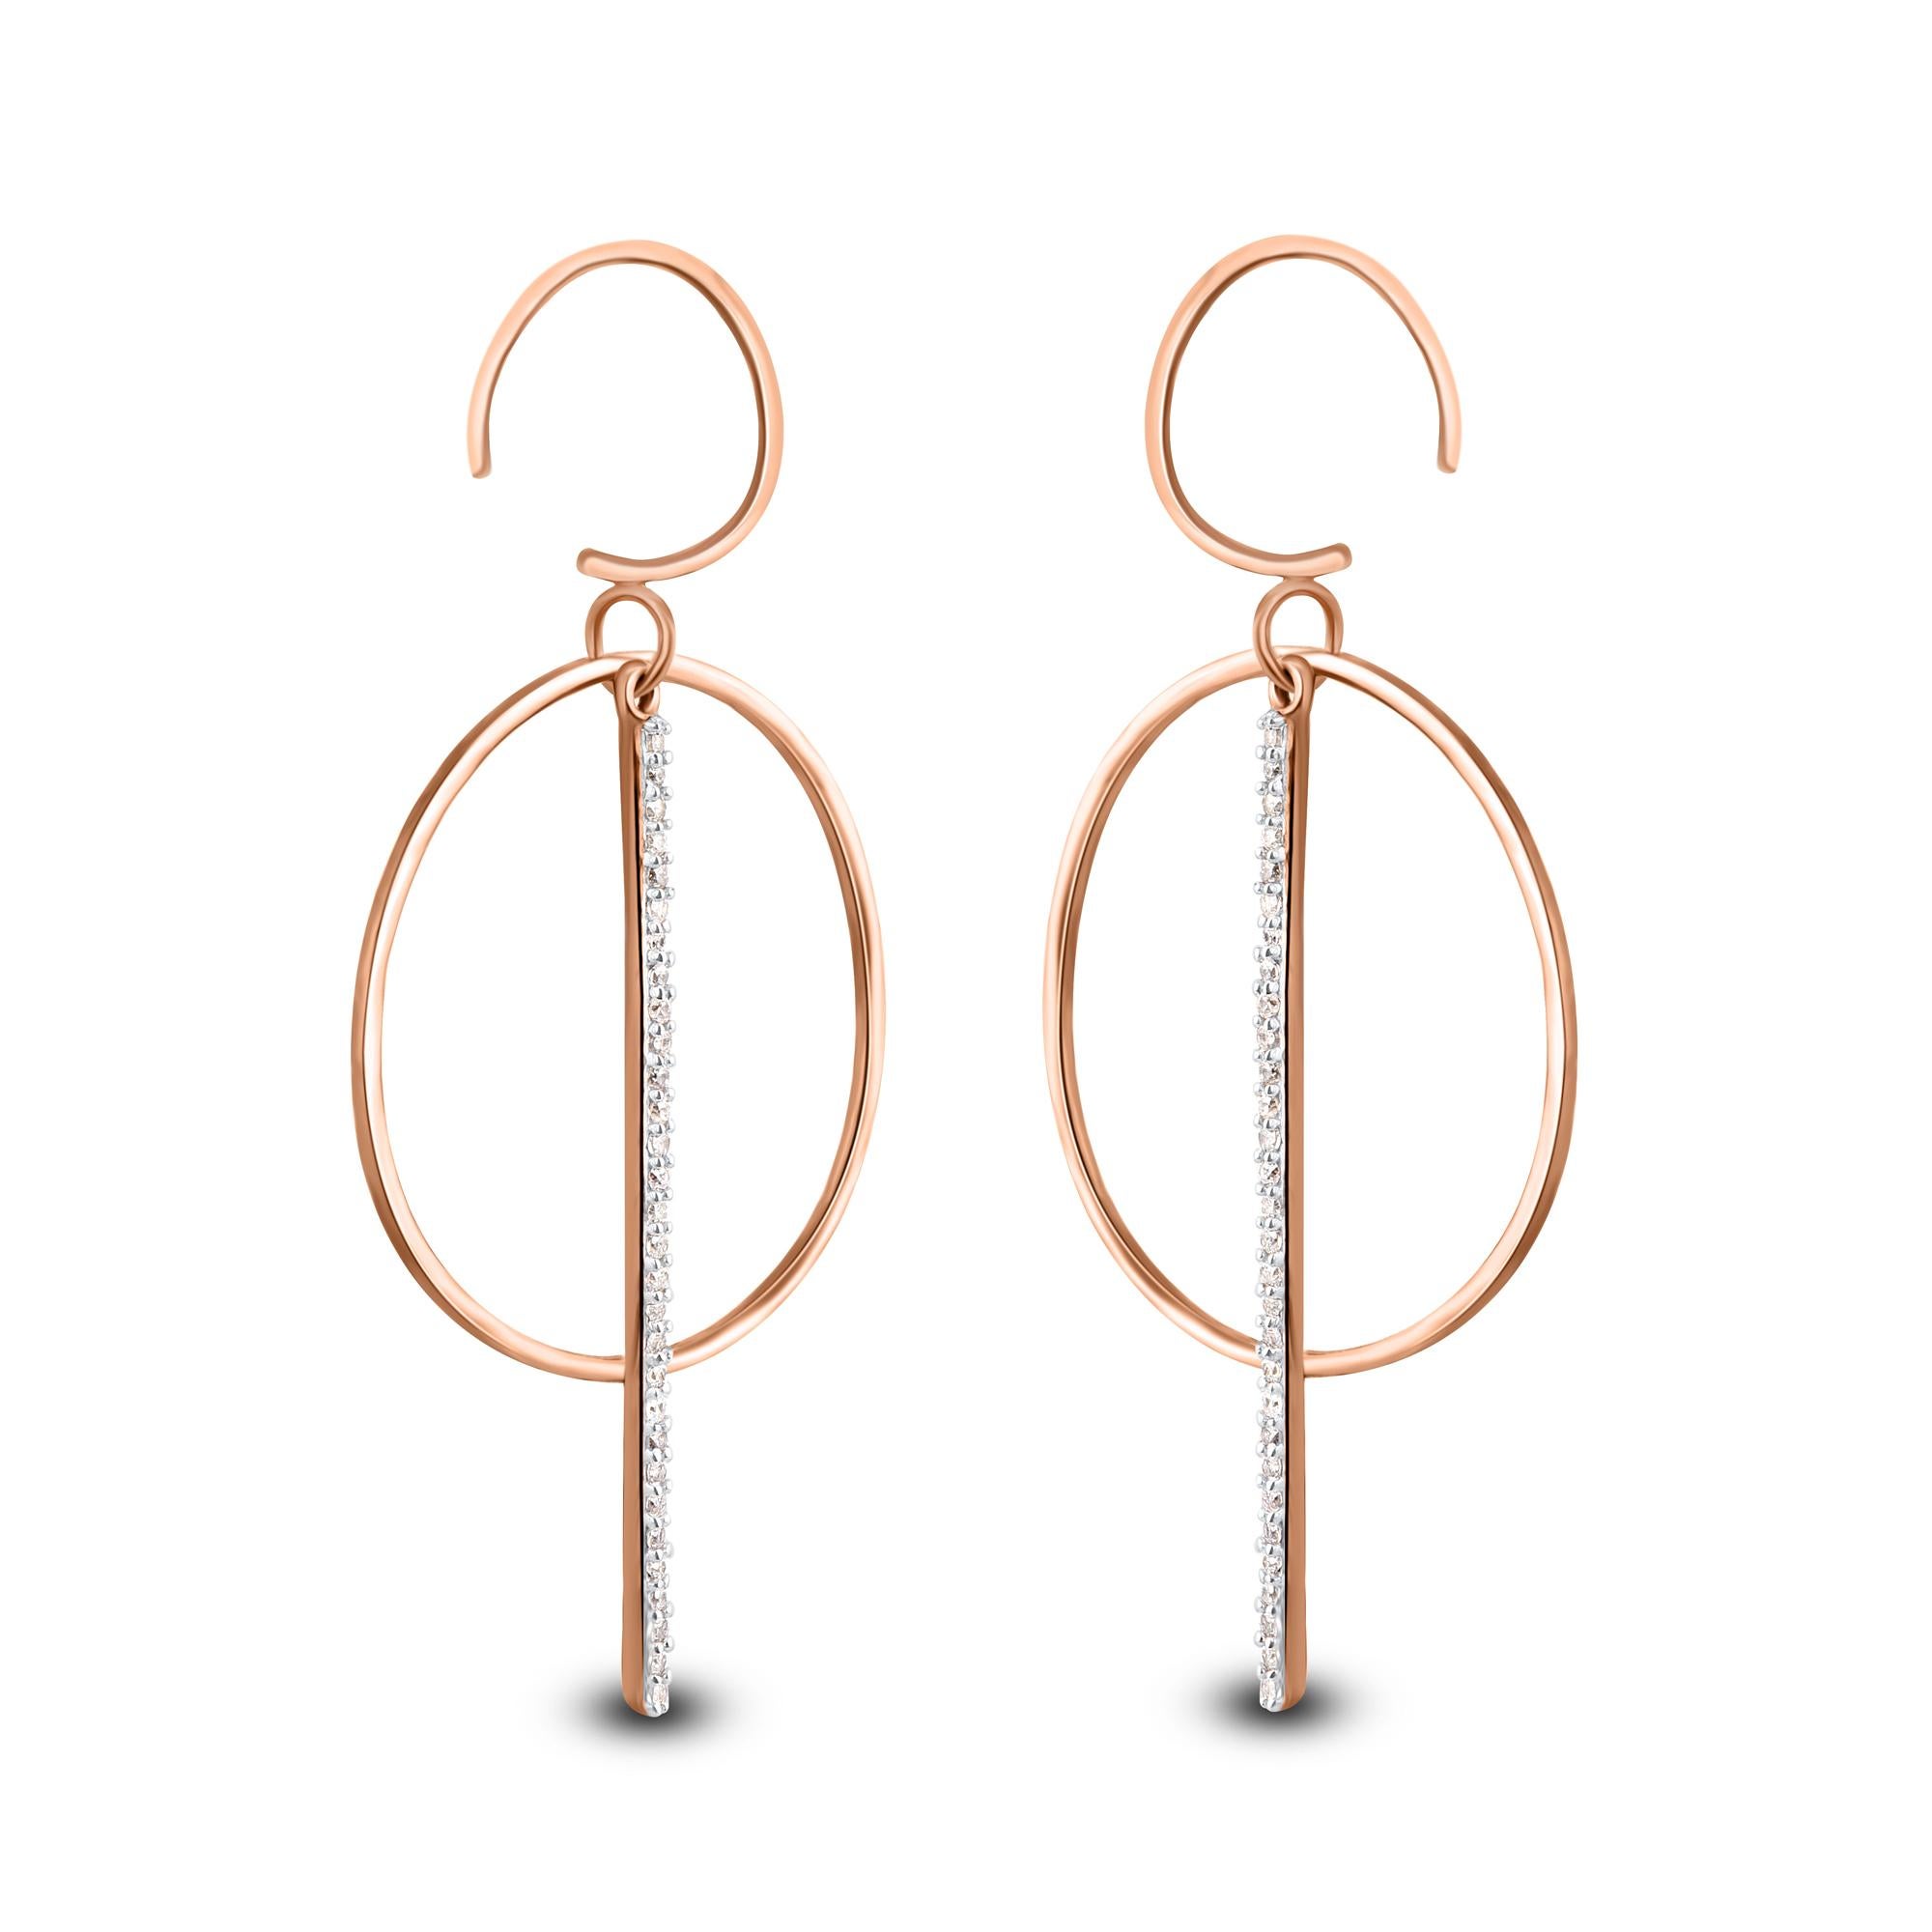 Bring charm to your look with this diamond circular and vertical drop earrings. The earrings is crafted from 14-karat Rose gold and features Round-60 set in prong setting and a high polish finish complete the Brilliant sophistication of this